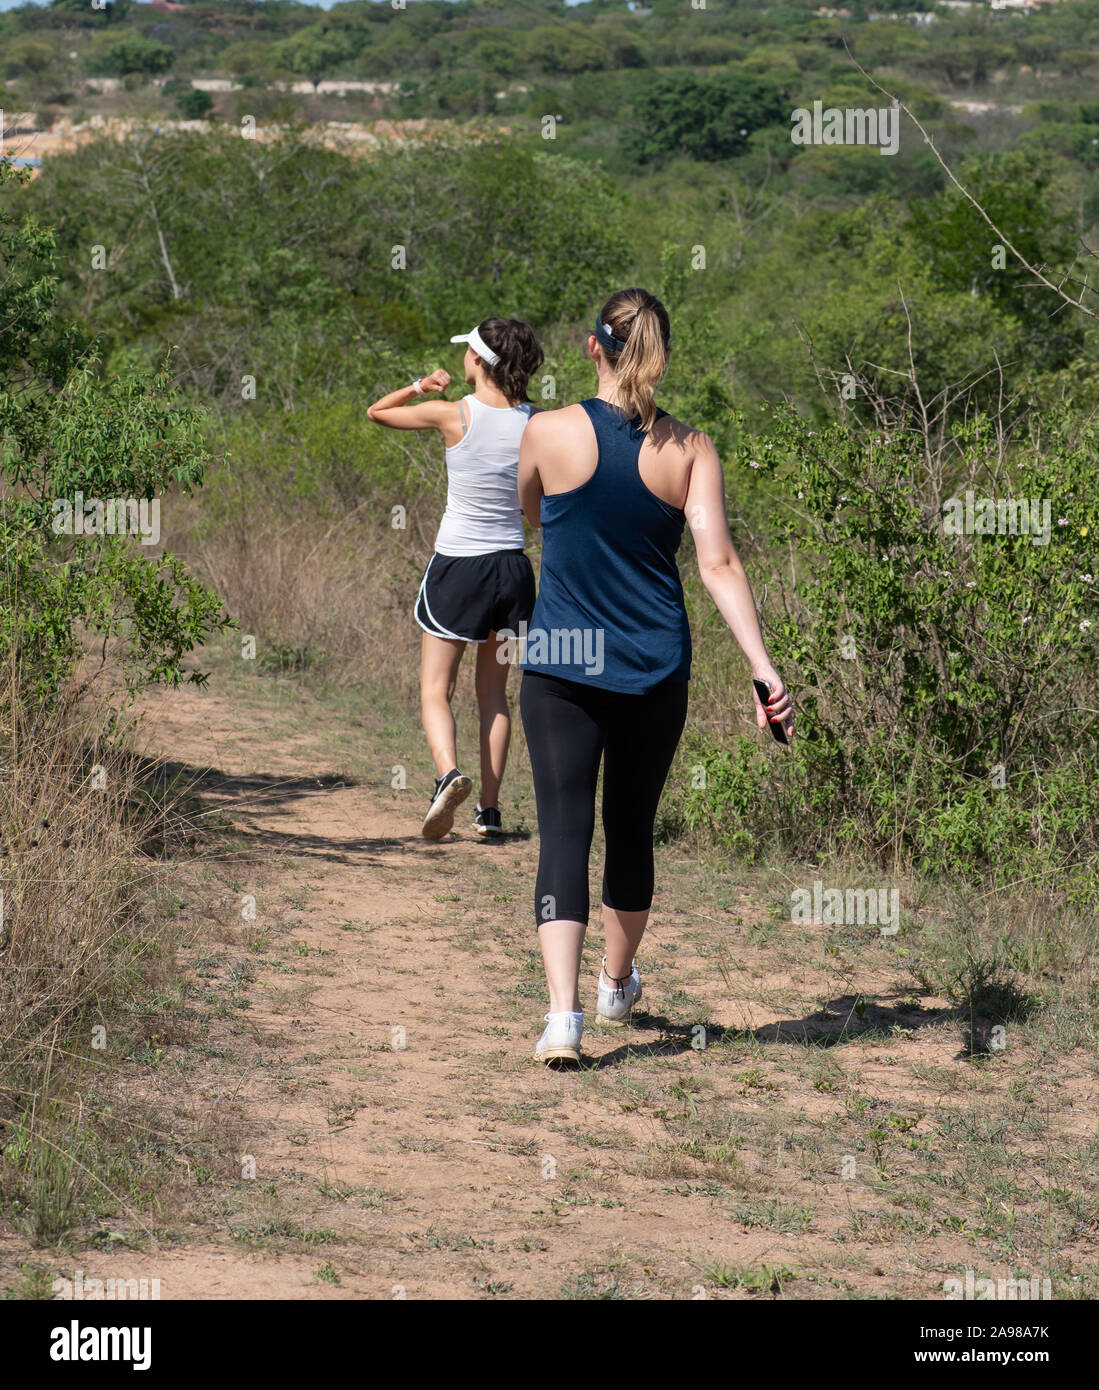 Two young women going for a walk out in nature Stock Photo